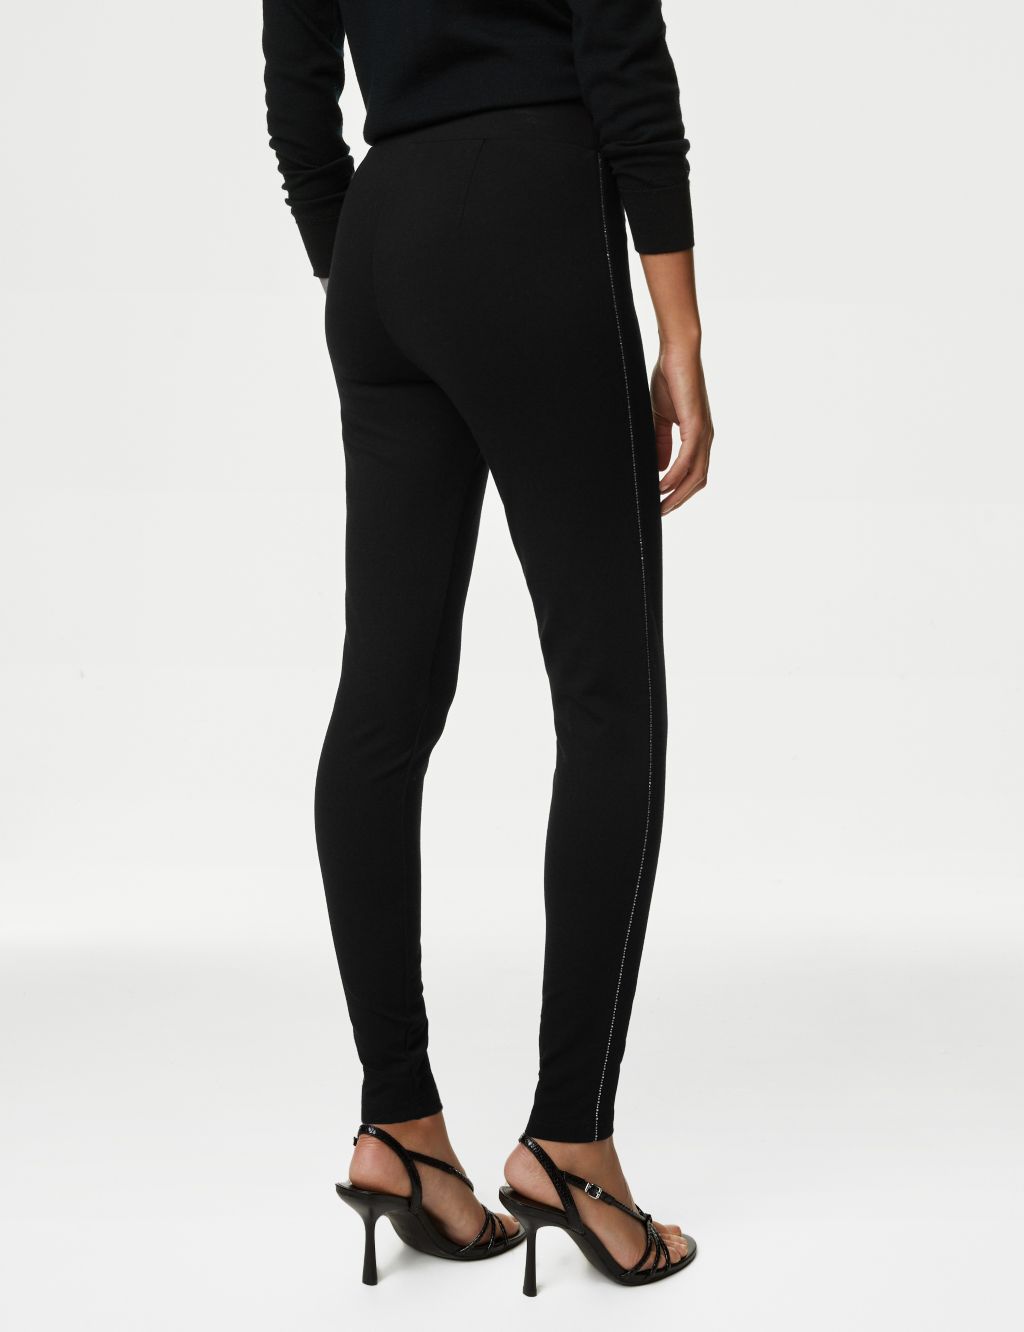 Sparkly Side Stripe High Waisted Leggings image 5